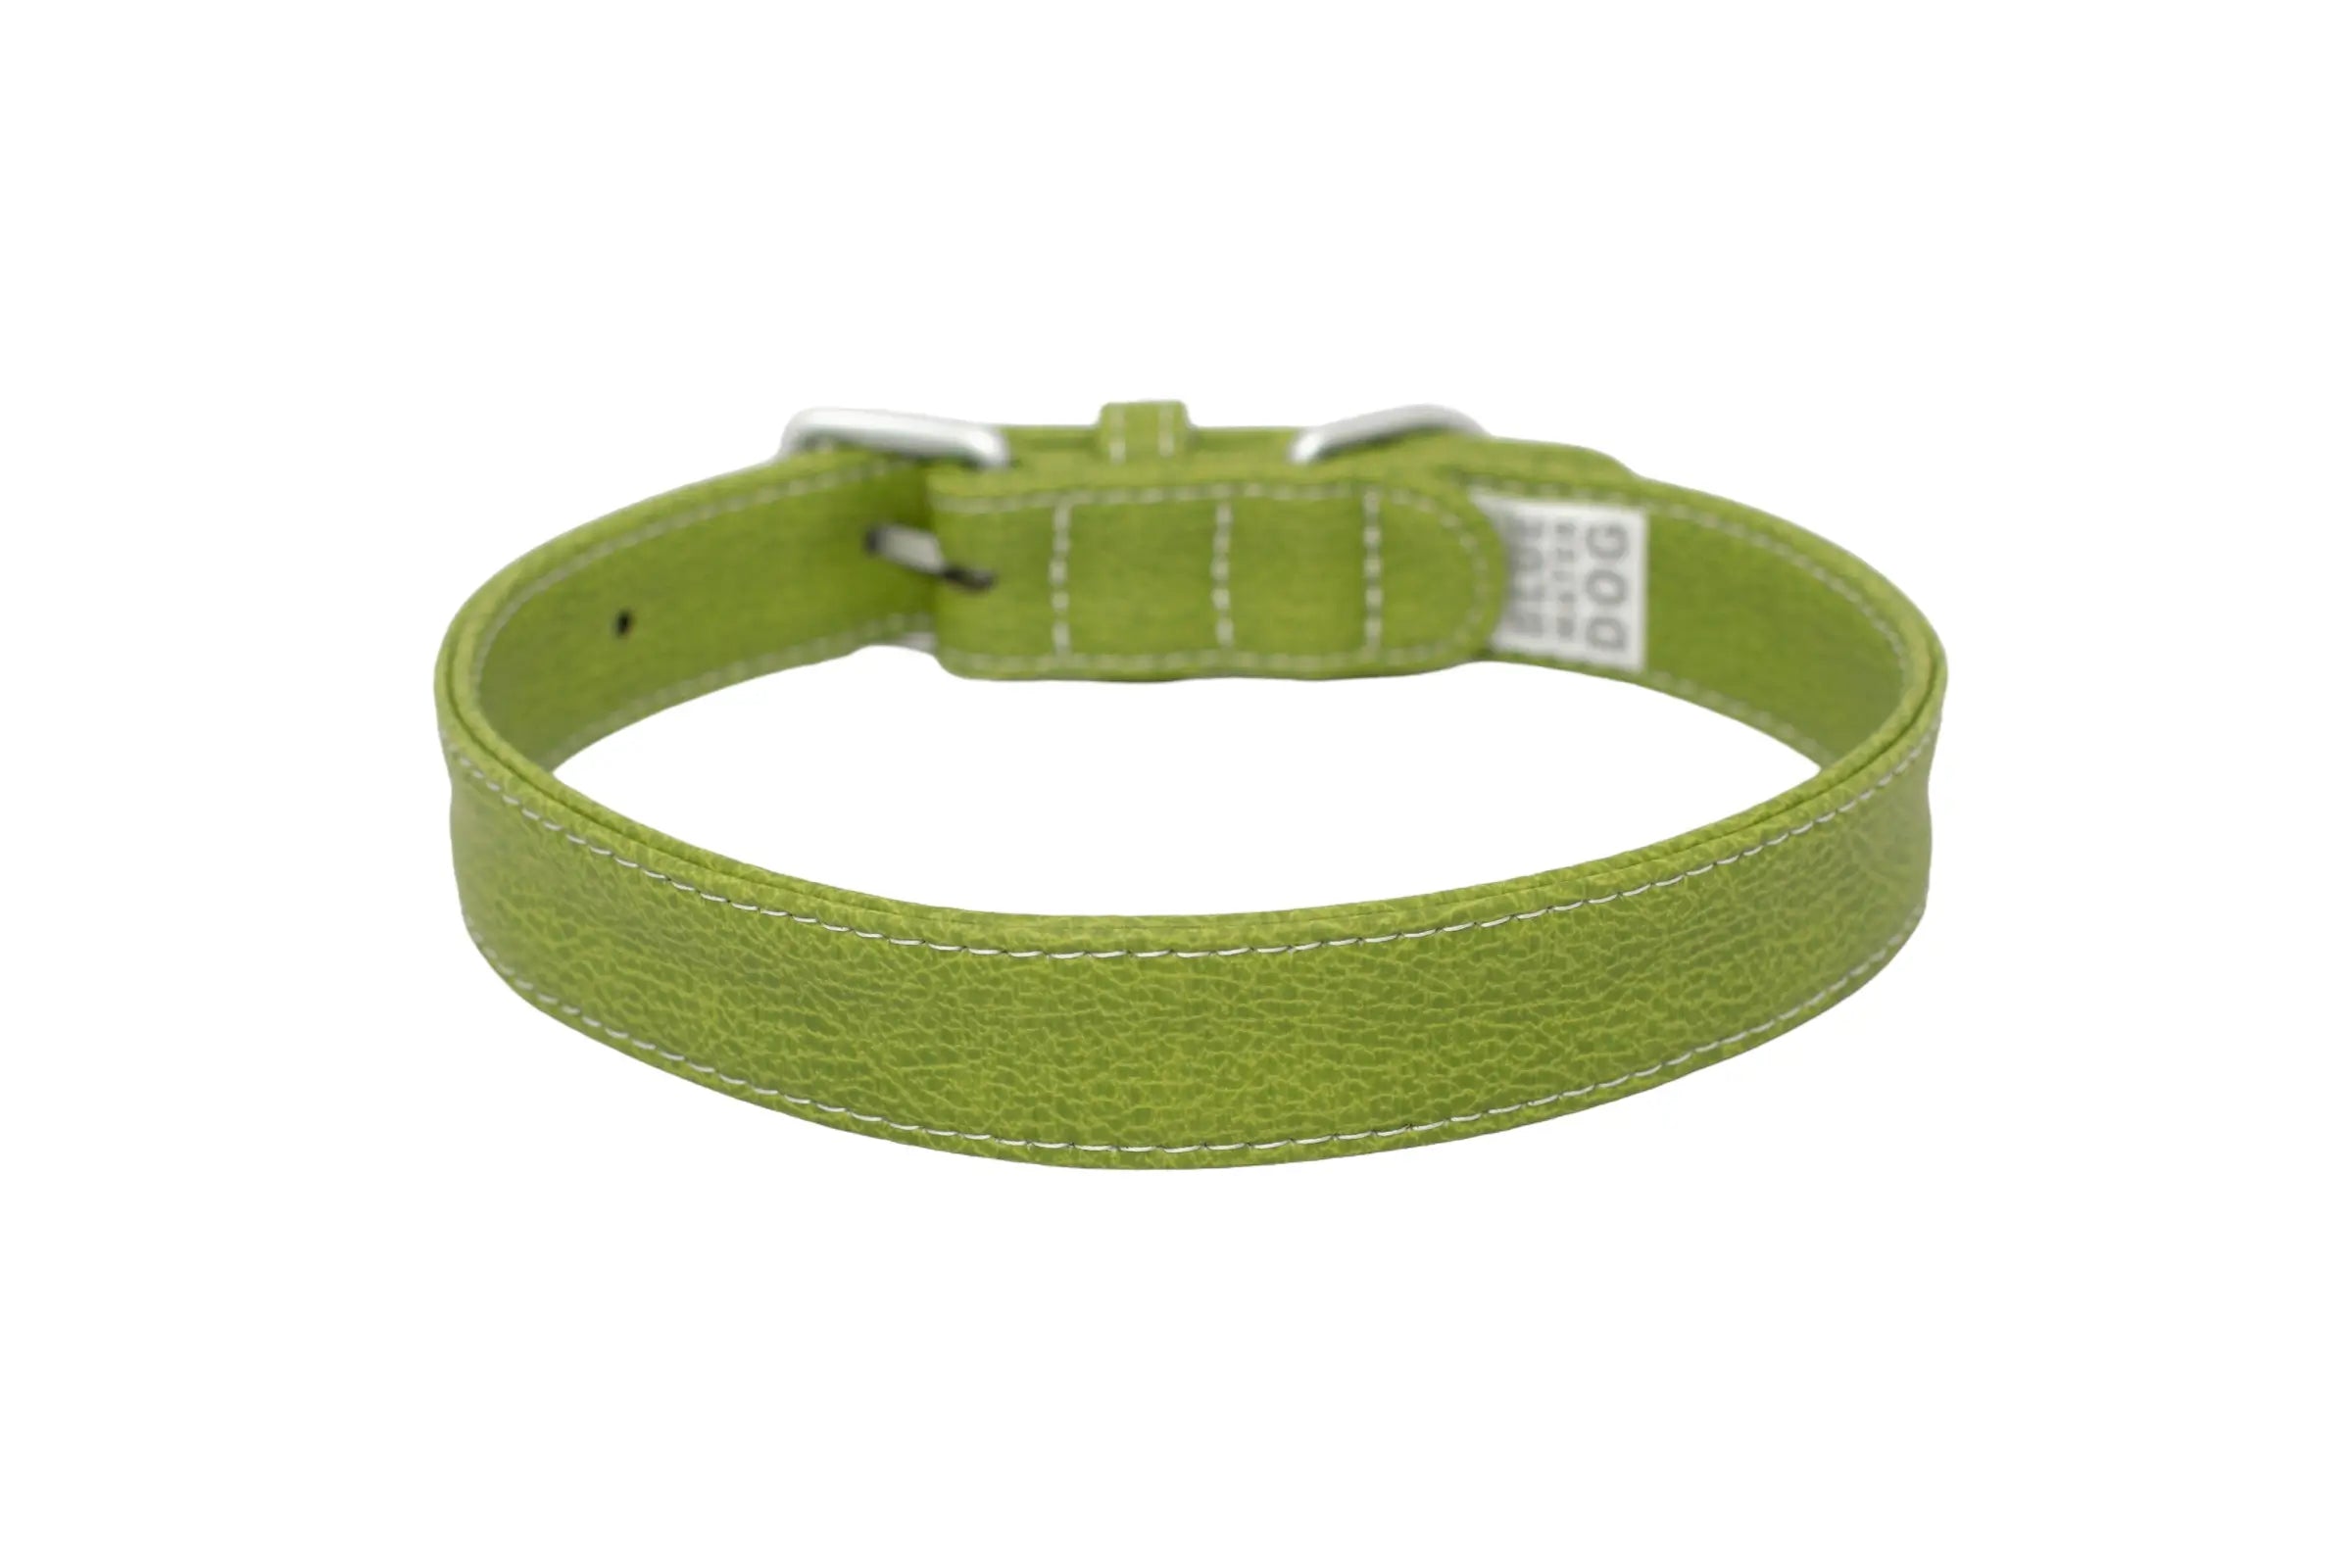 Back of a waterproof and durable dog collar with vegan leather and marine grade anodized aluminum hardware in the color lime green.